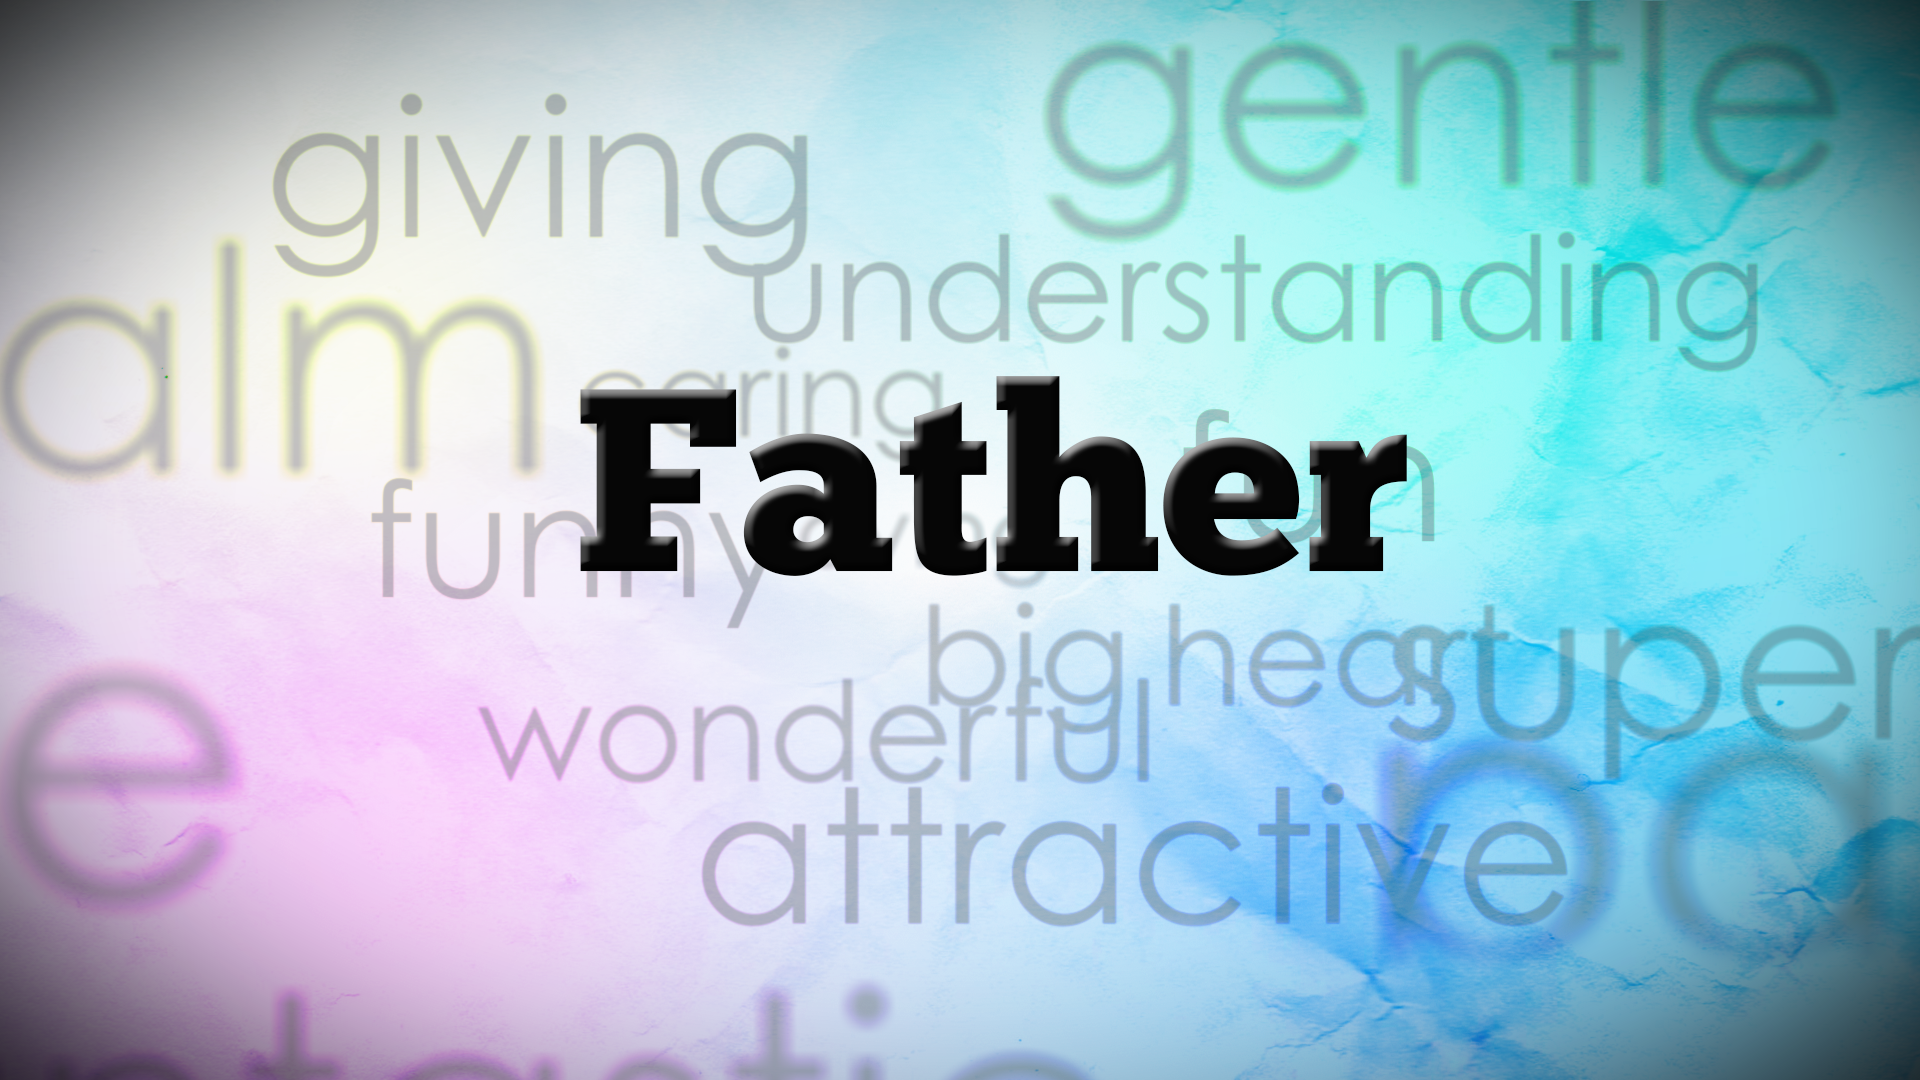 HD desktop wallpaper for Father's Day with the word Father overlaid on a multicolored background amidst assorted positive adjectives.